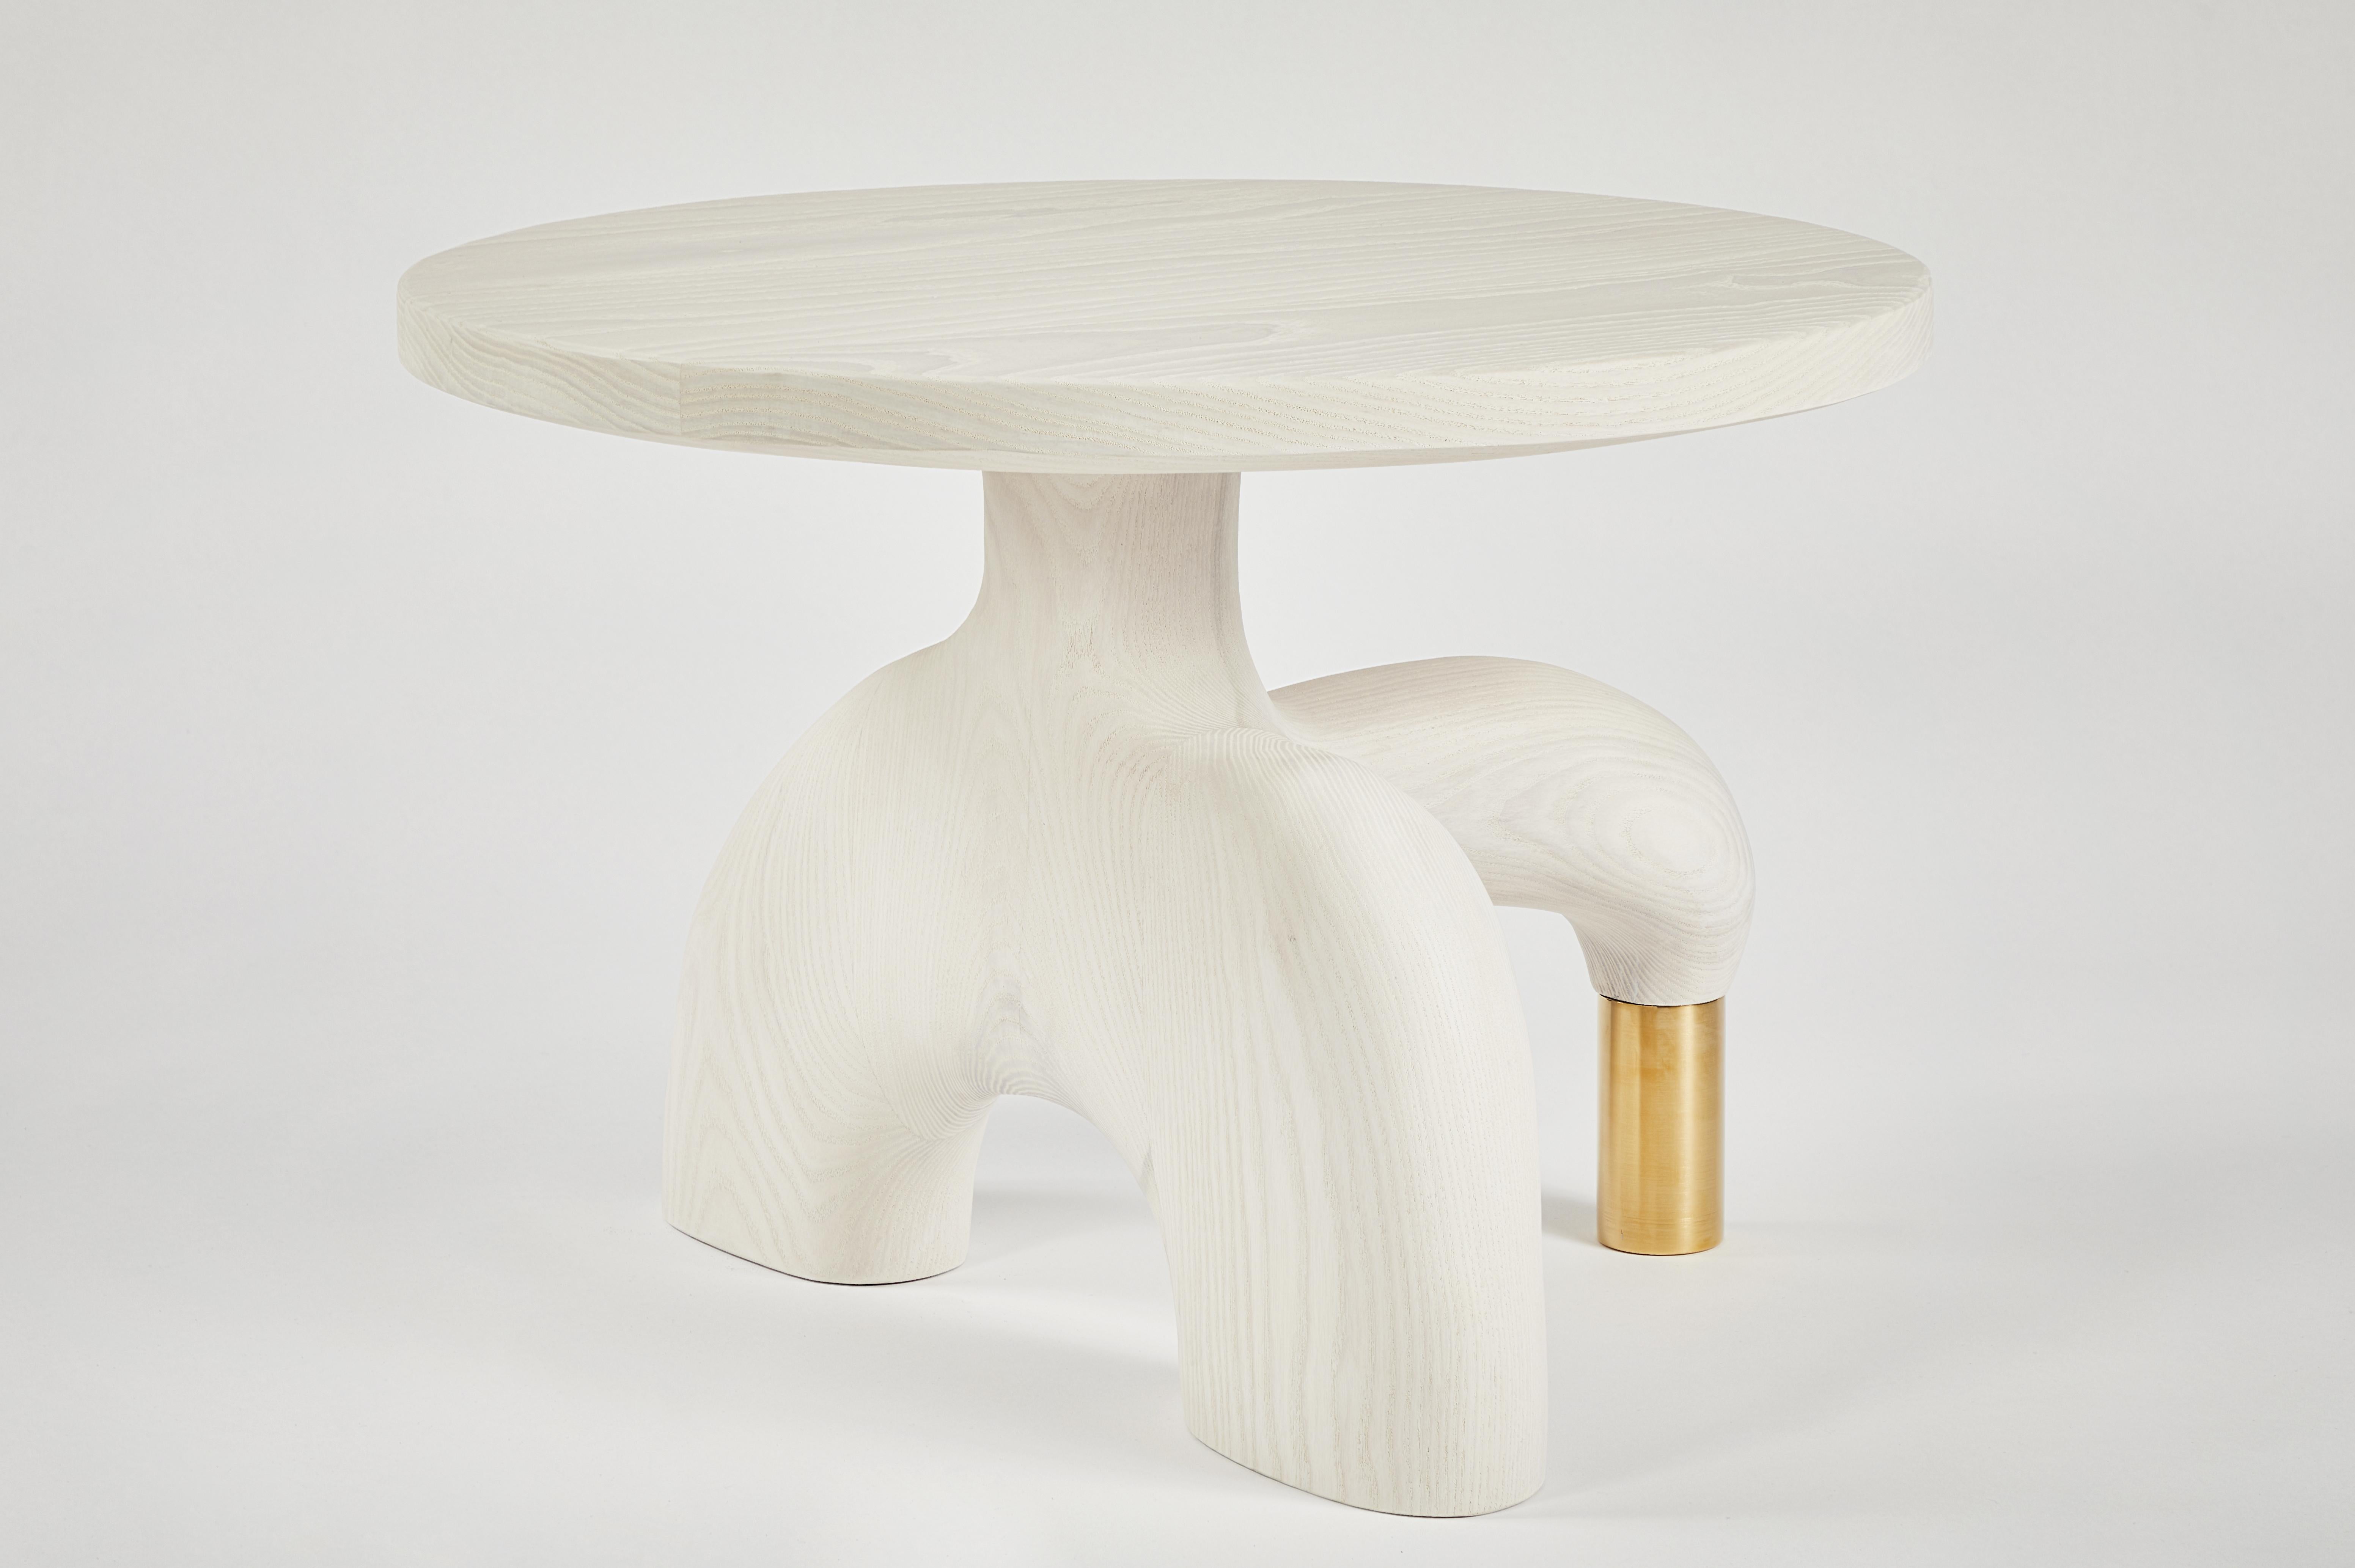 Sculptural organic hand carved, bleached ash side table. Made in the USA by Casey McCafferty.


Available finishes:
Oiled black walnut, oiled white oak, bleached white oak, charred ash, oxidized maple

Customization is available. Charges may